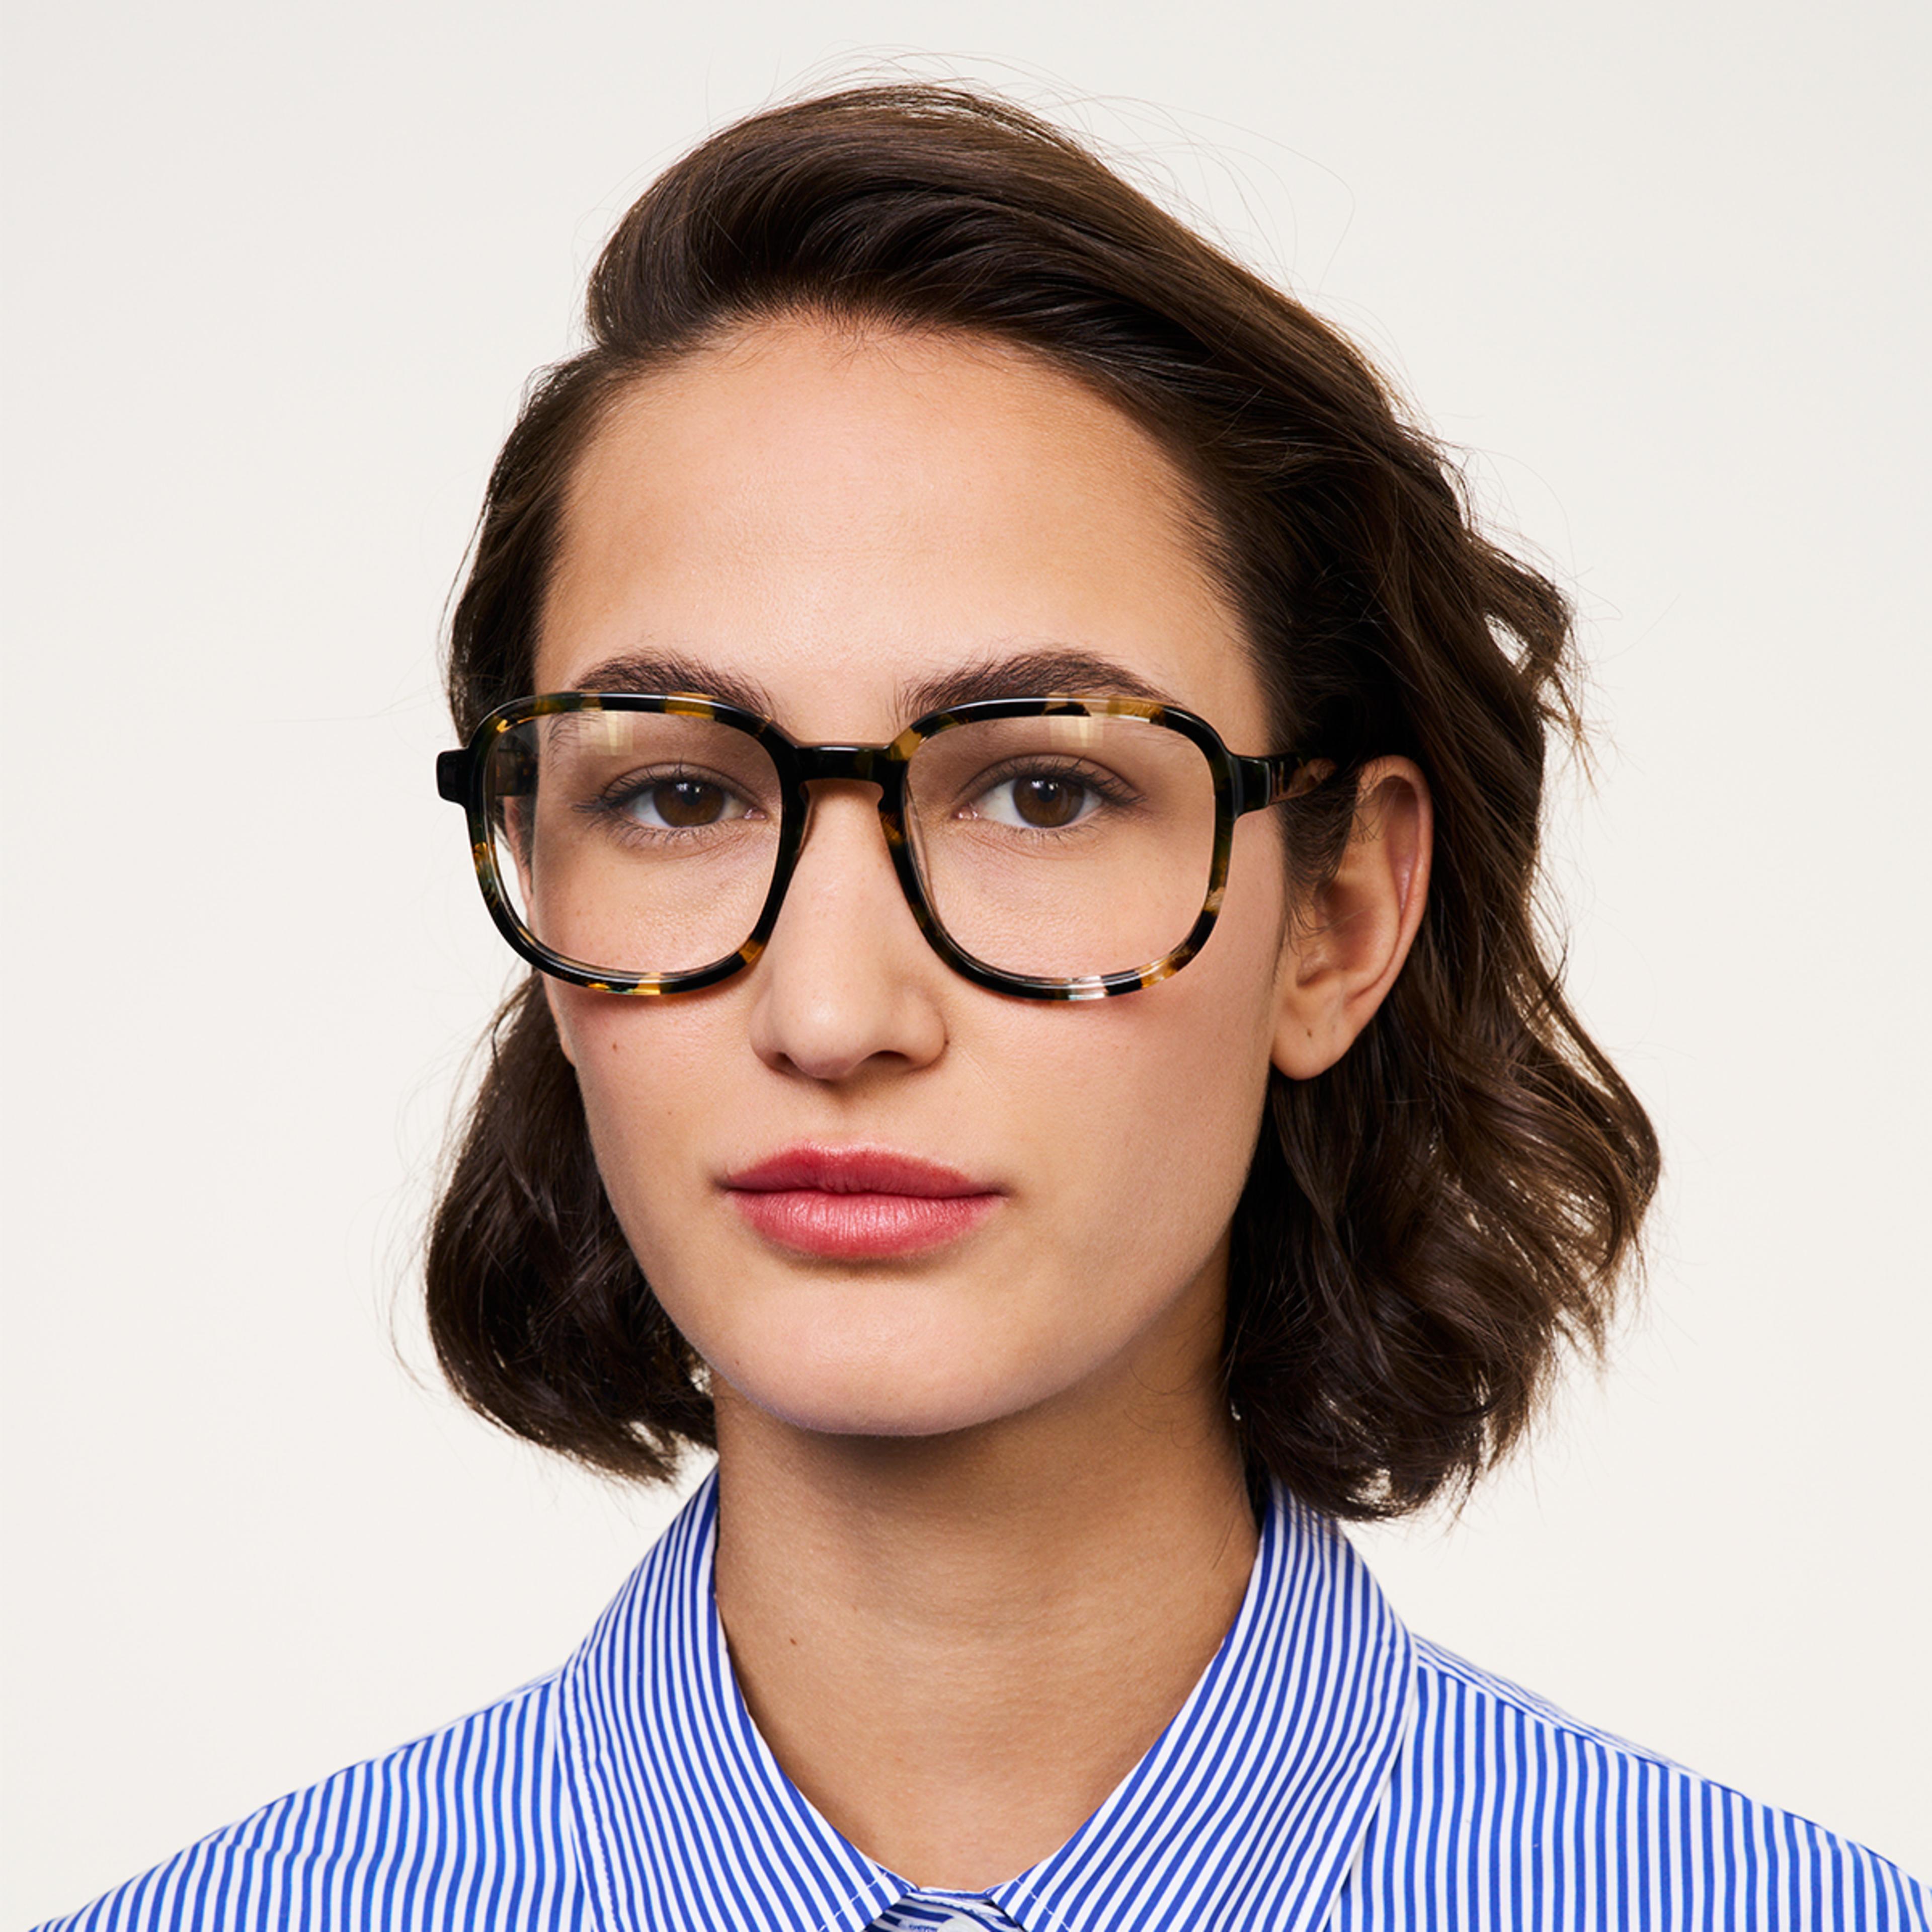 Ace & Tate Glasses | Square Acetate in Grey